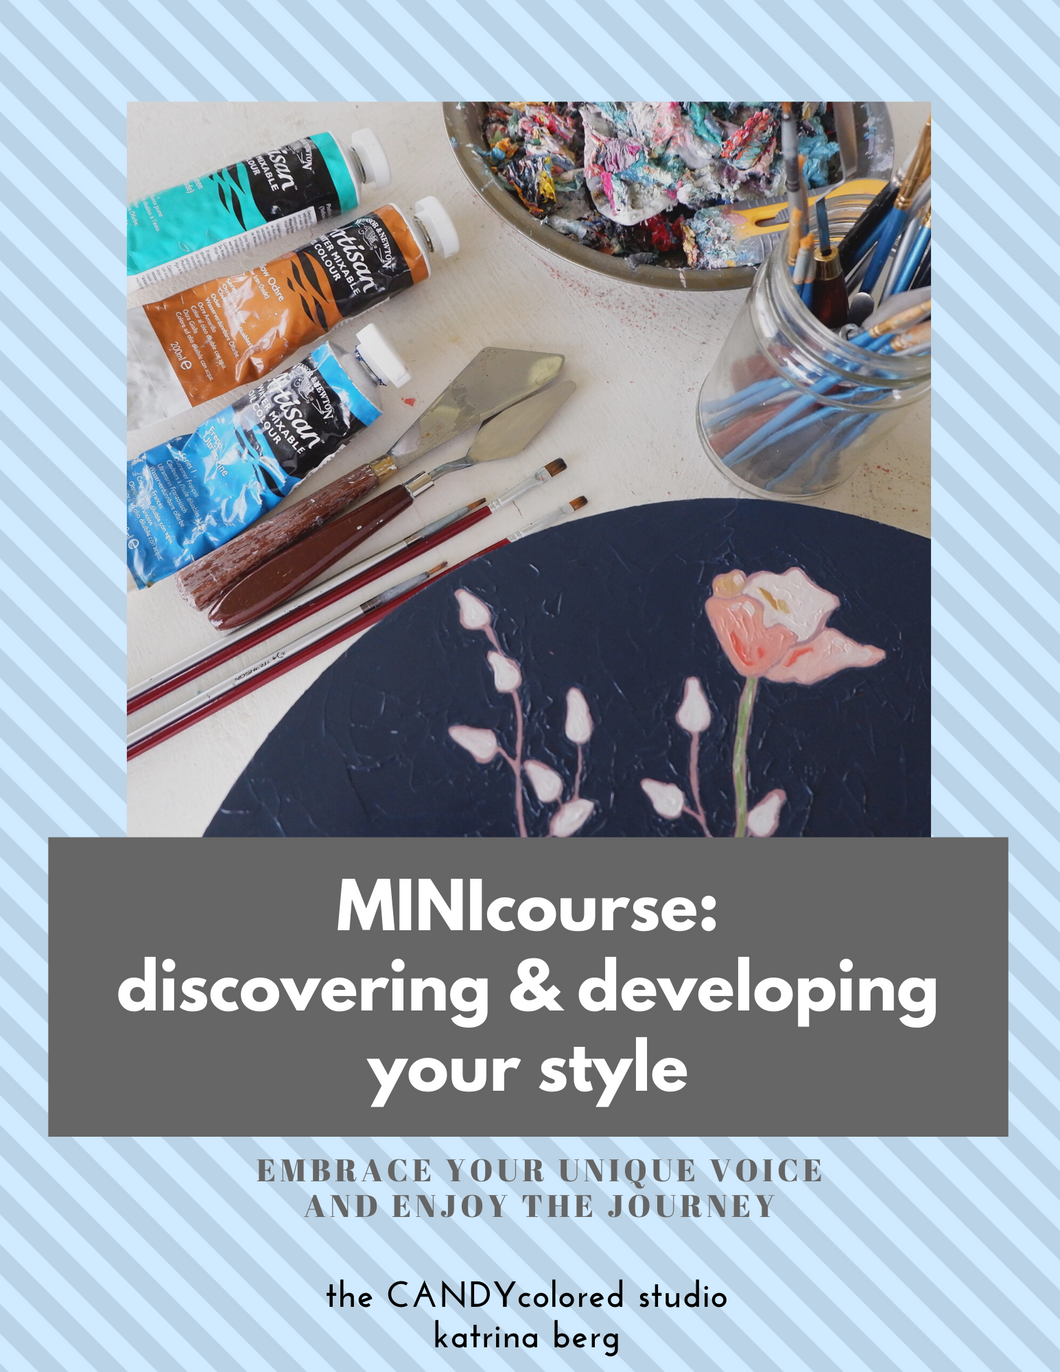 MINI course: discovering & developing your style